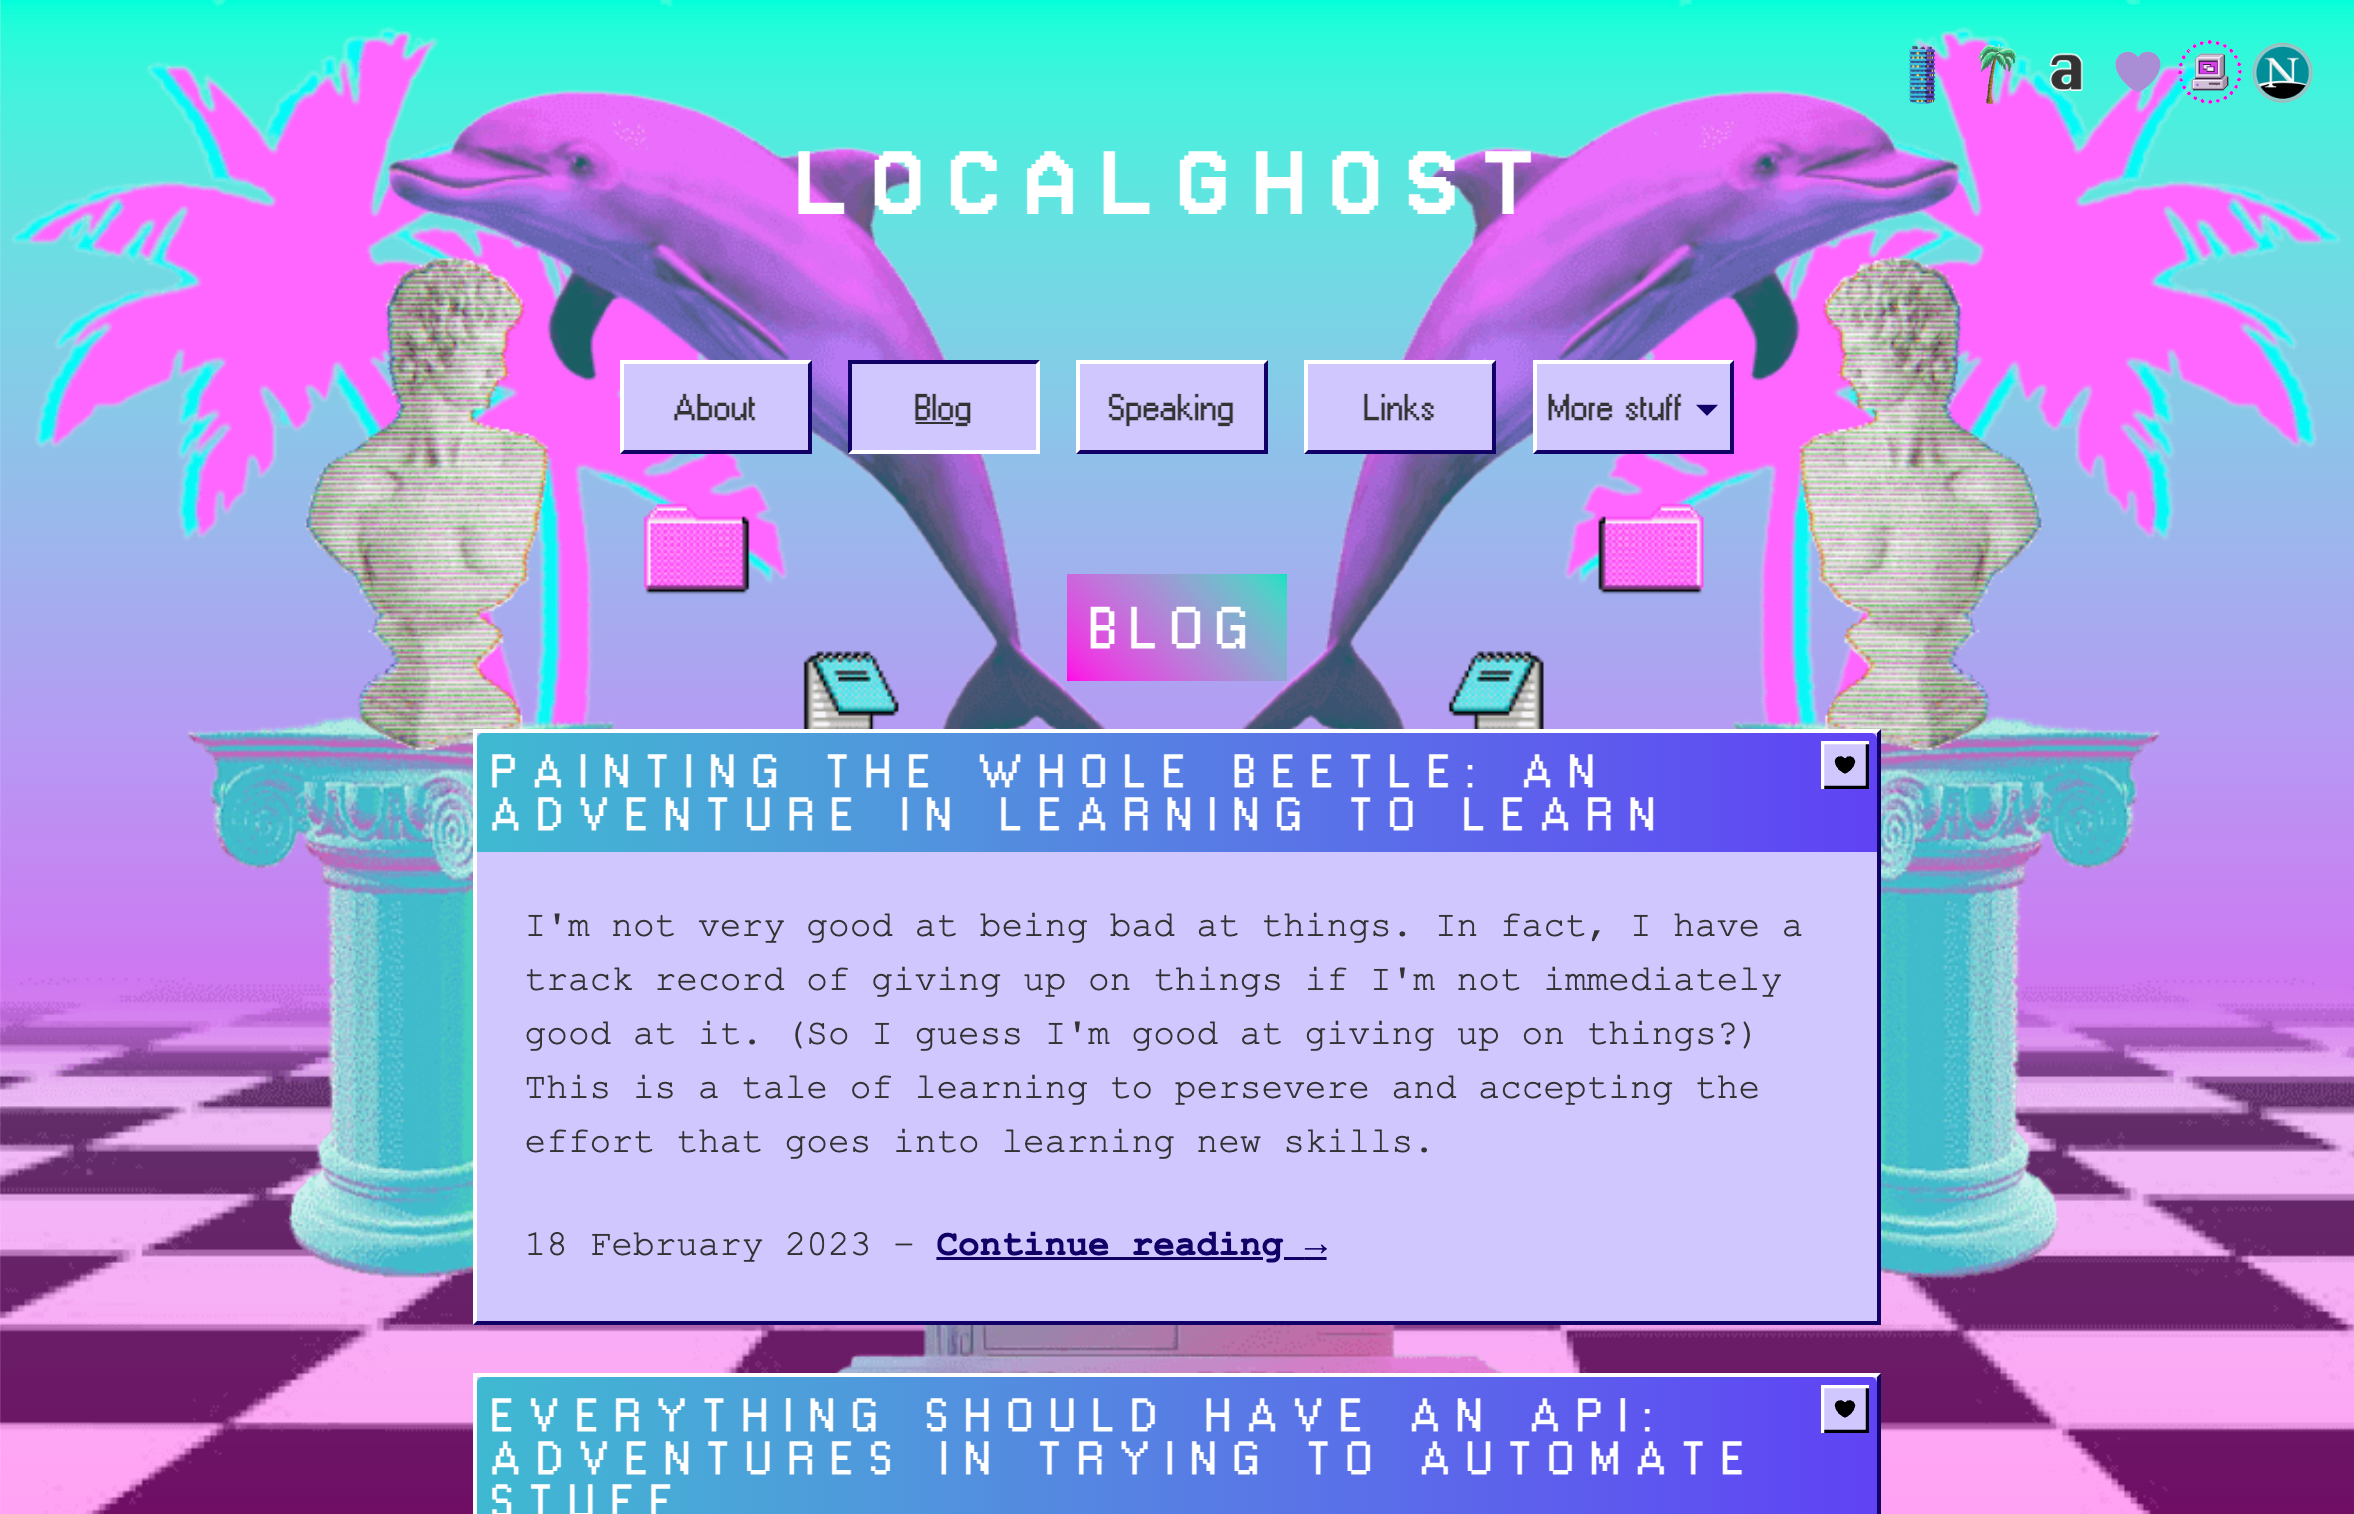 An intense vaporwave aesthetic for localghost, Sophie Koonin's personal website. Twin dolphins breach out from an infinite checkerboard background. In front of them are mirrored Greek statue busts placed on Corinthian columns. Behind the dolphins are cartoon palm trees. Everything is tinted pink, teal, and purple.In front of the columns is the main content of the website, a blog landing showing a preview of a post titled, 'Painting the whole beetle: an adventure in learning to learn.' Screenshot.